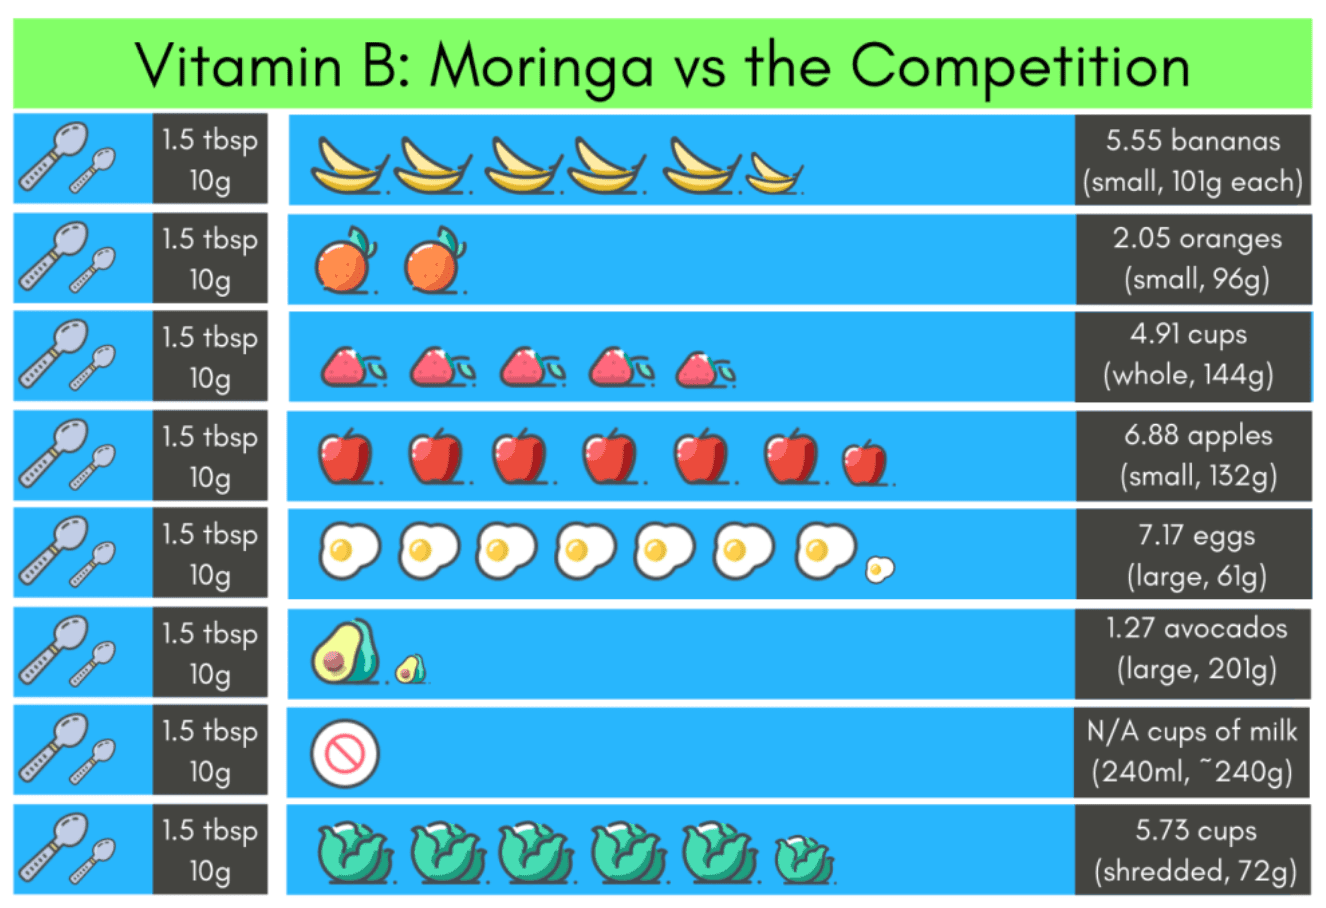 An image of Moringa vs the competition in vitamin B